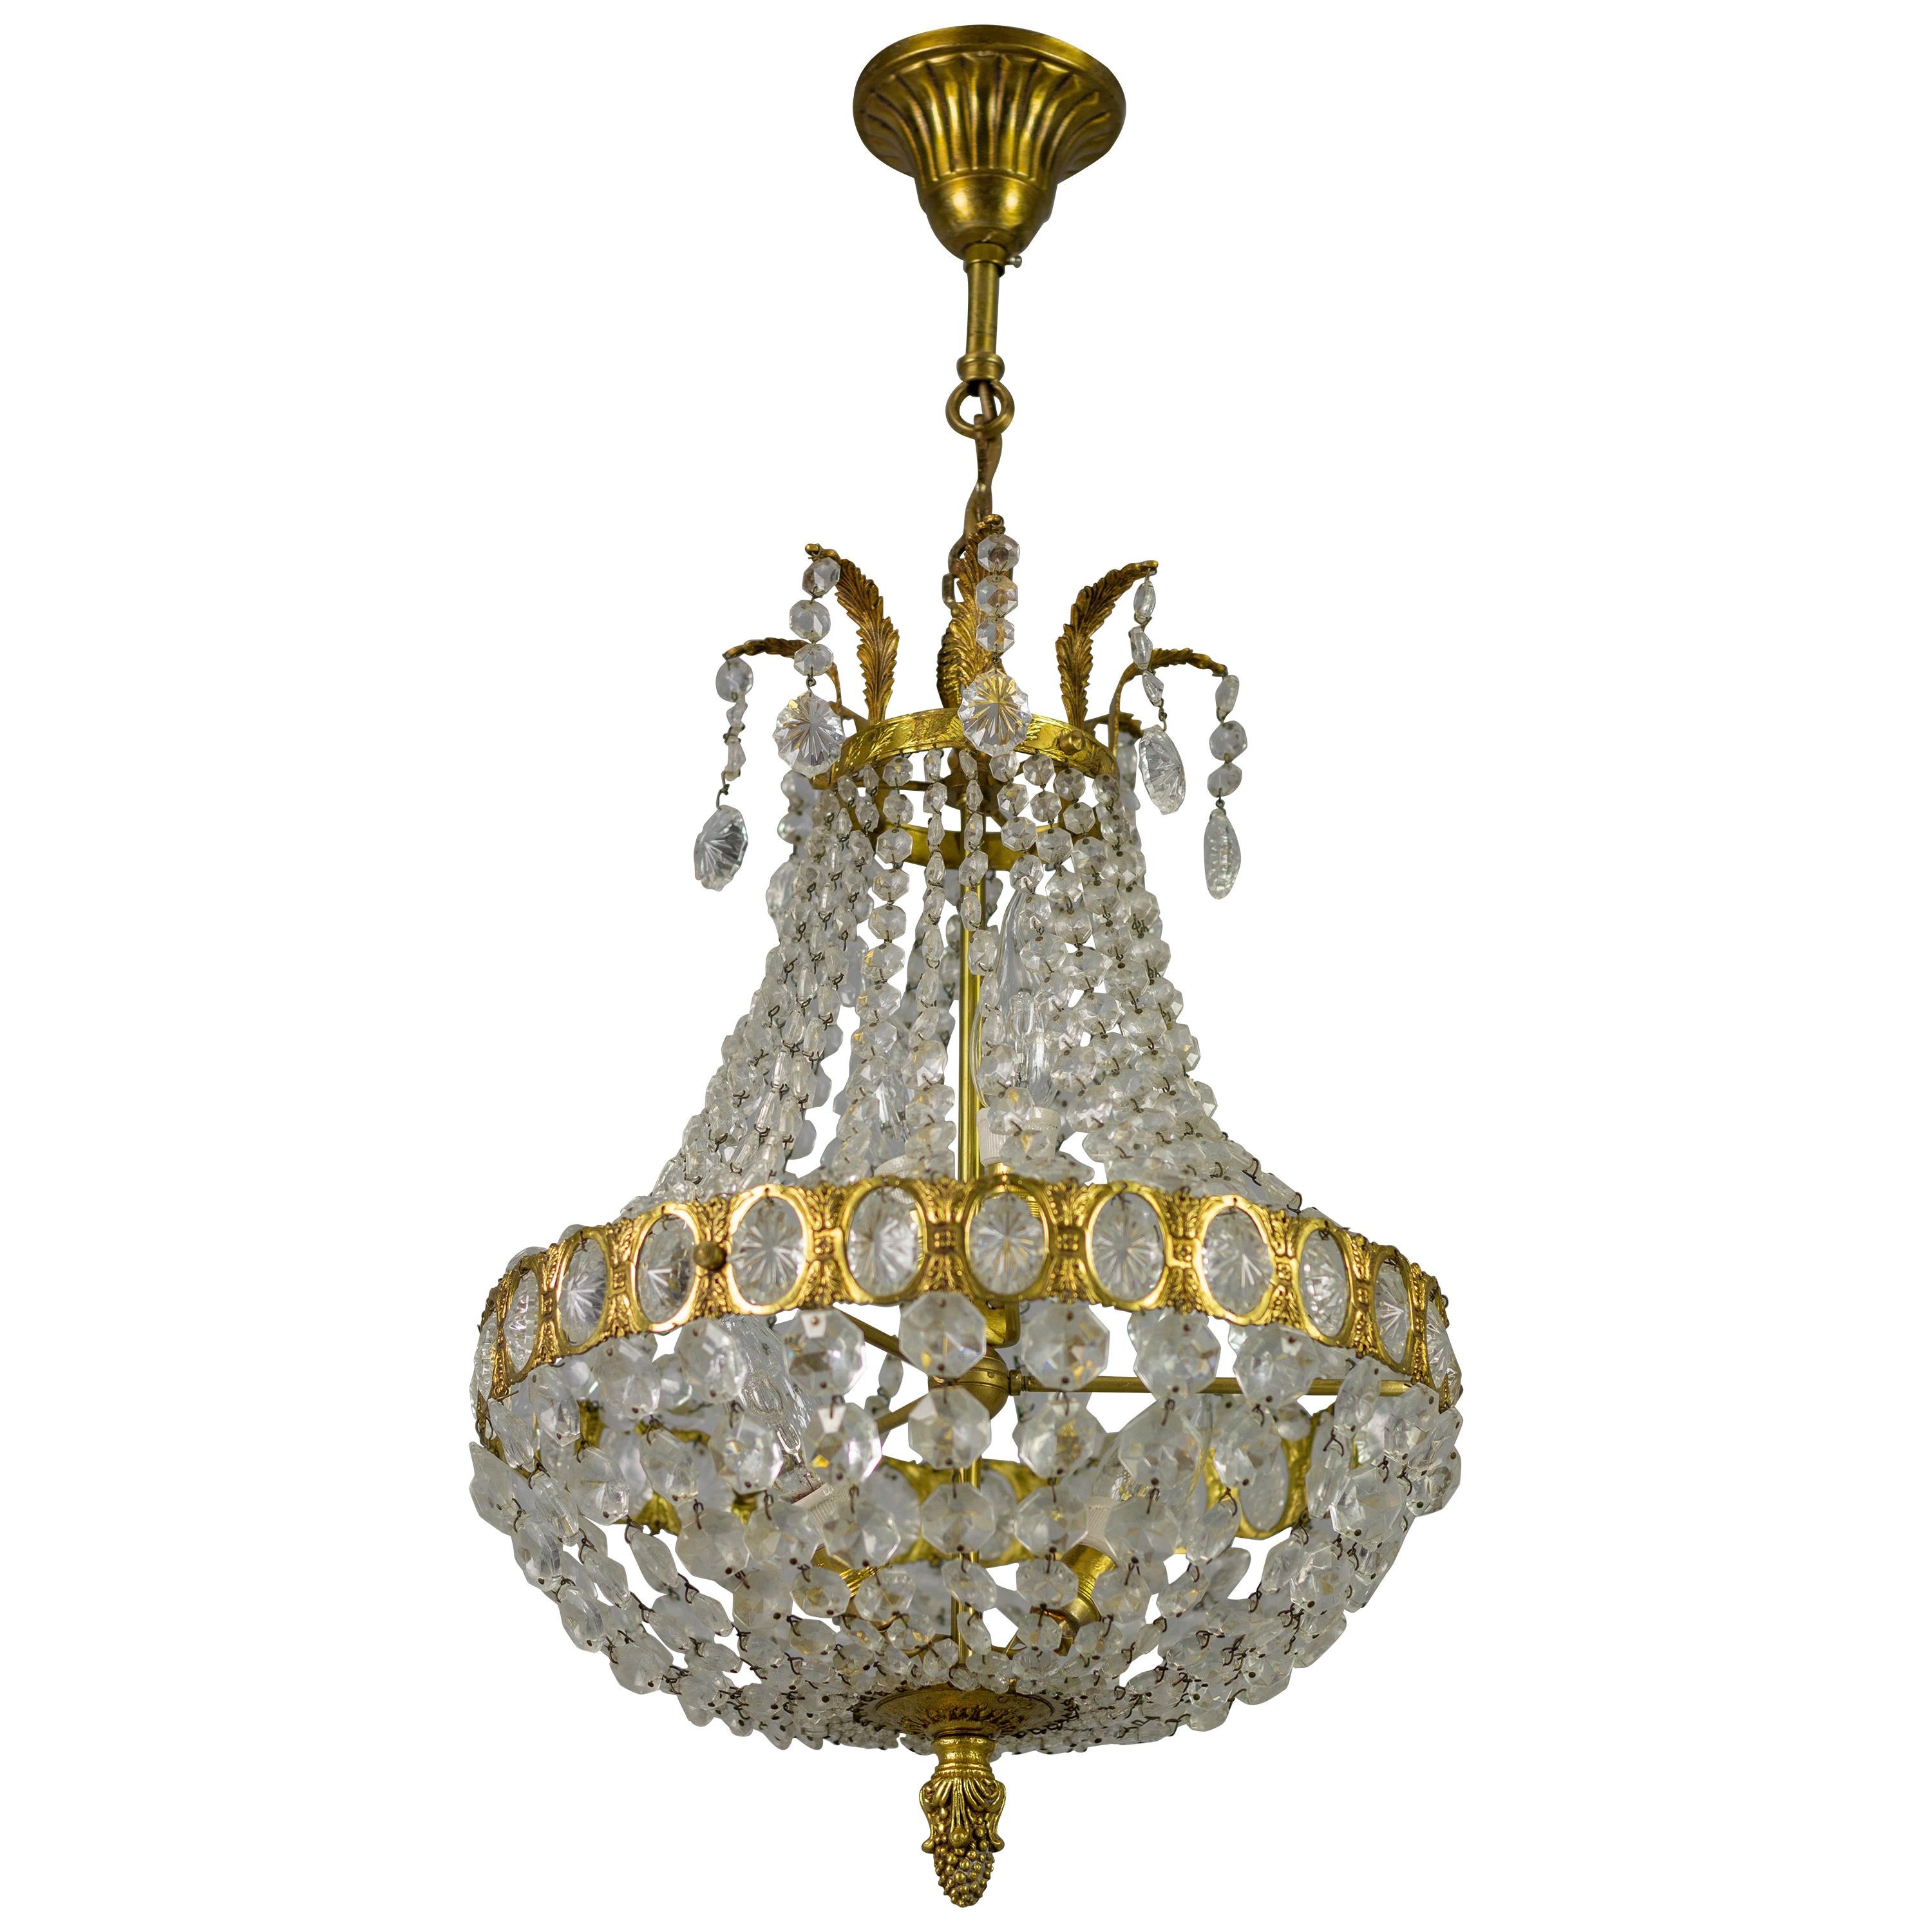 French Empire Style Crystal Glass and Four-Light Basket-Shaped Chandelier